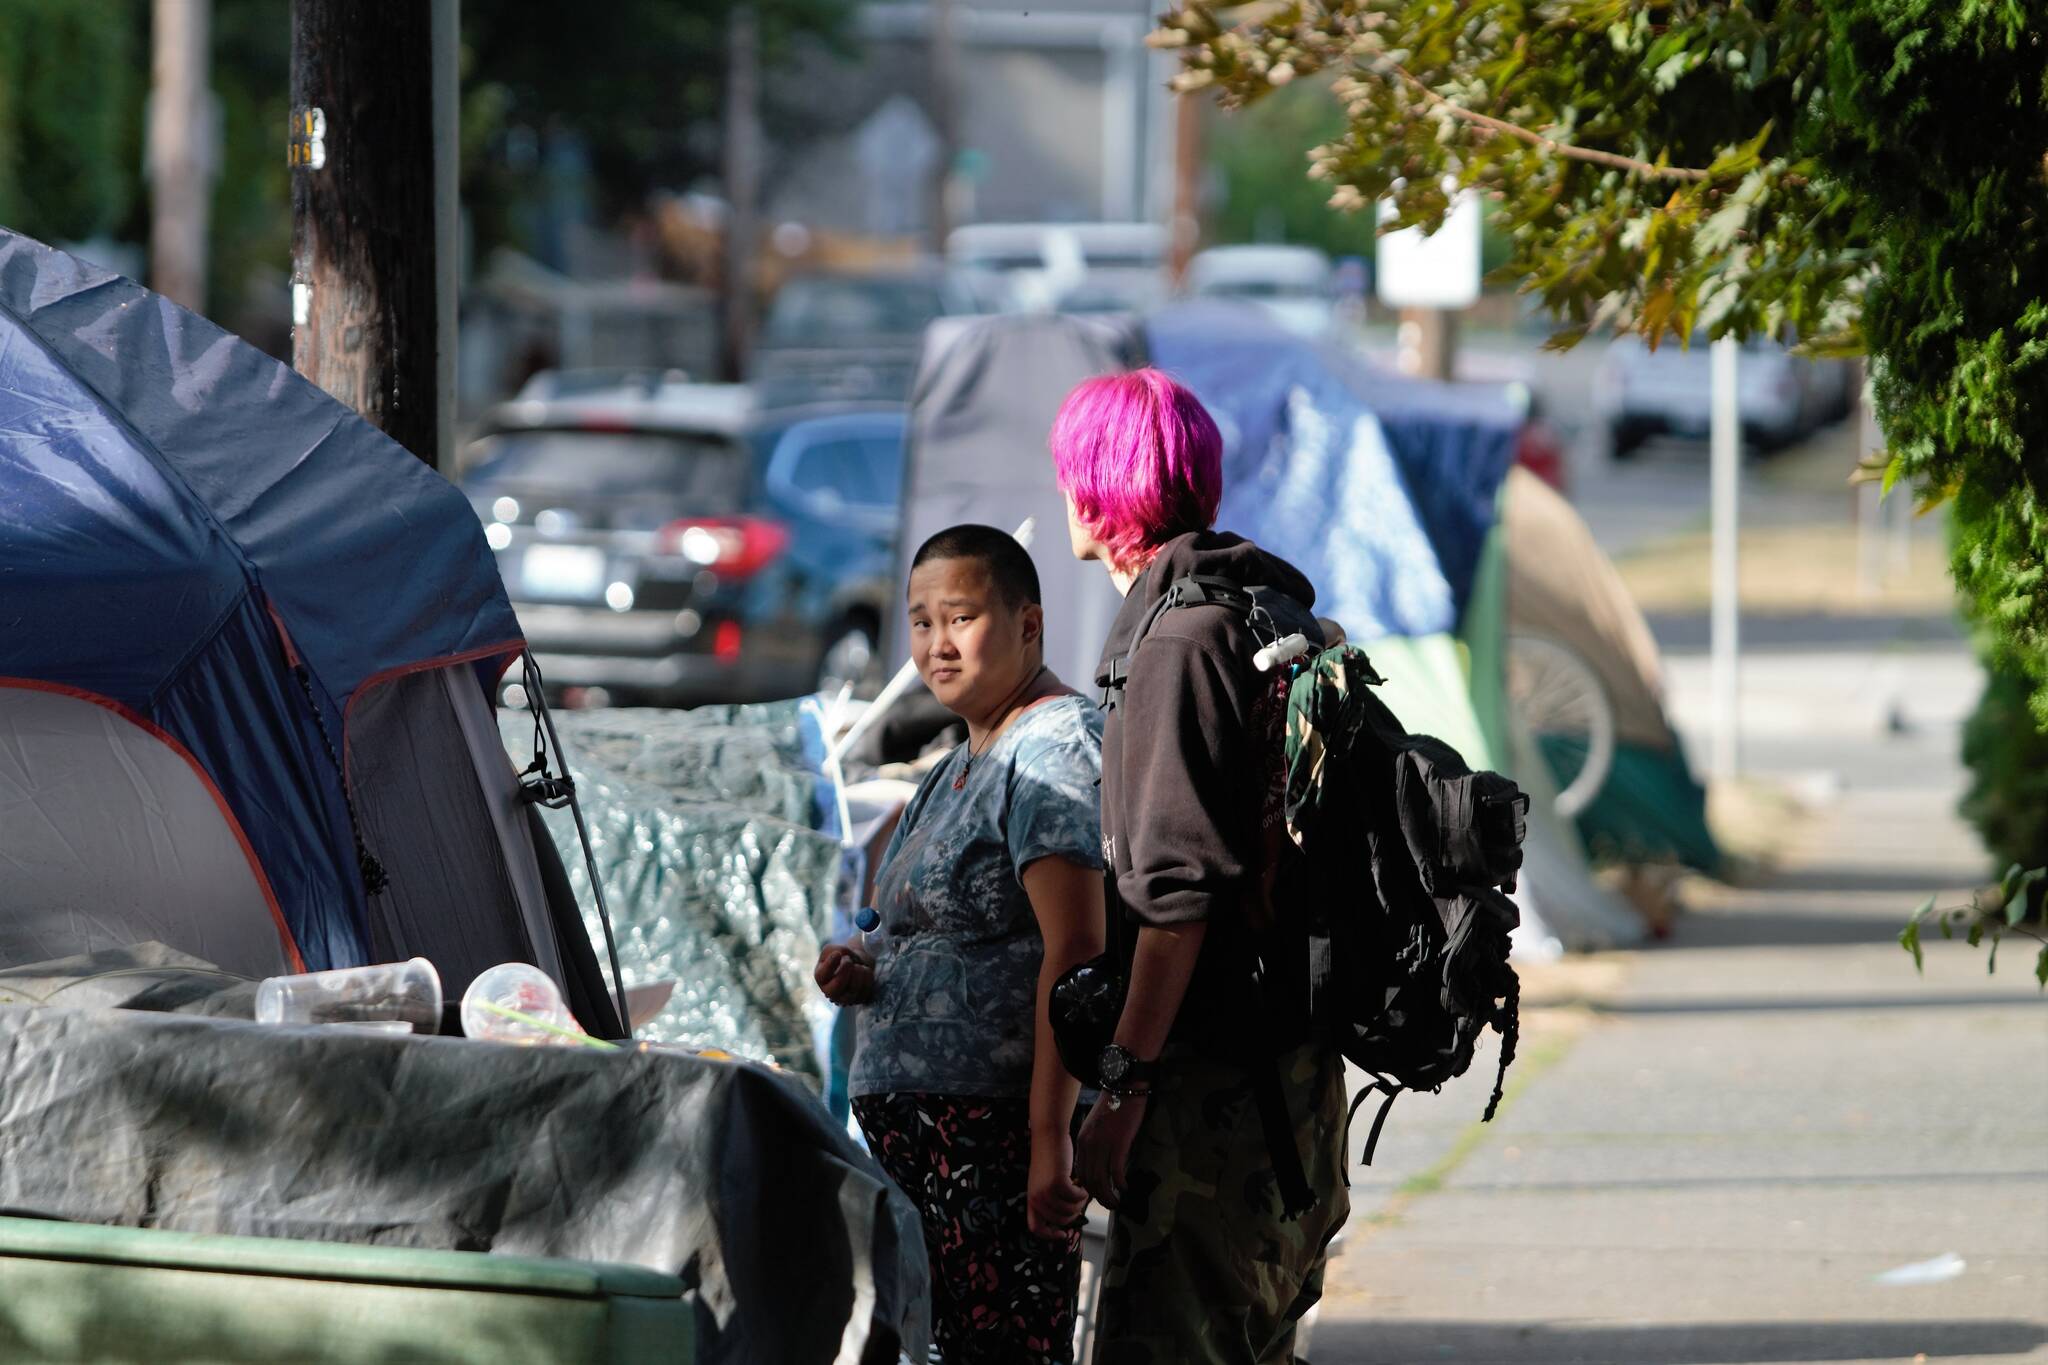 Elisha Meyer/Kitsap News Group
Tents and homes have been lining up off Broadway Avenue.